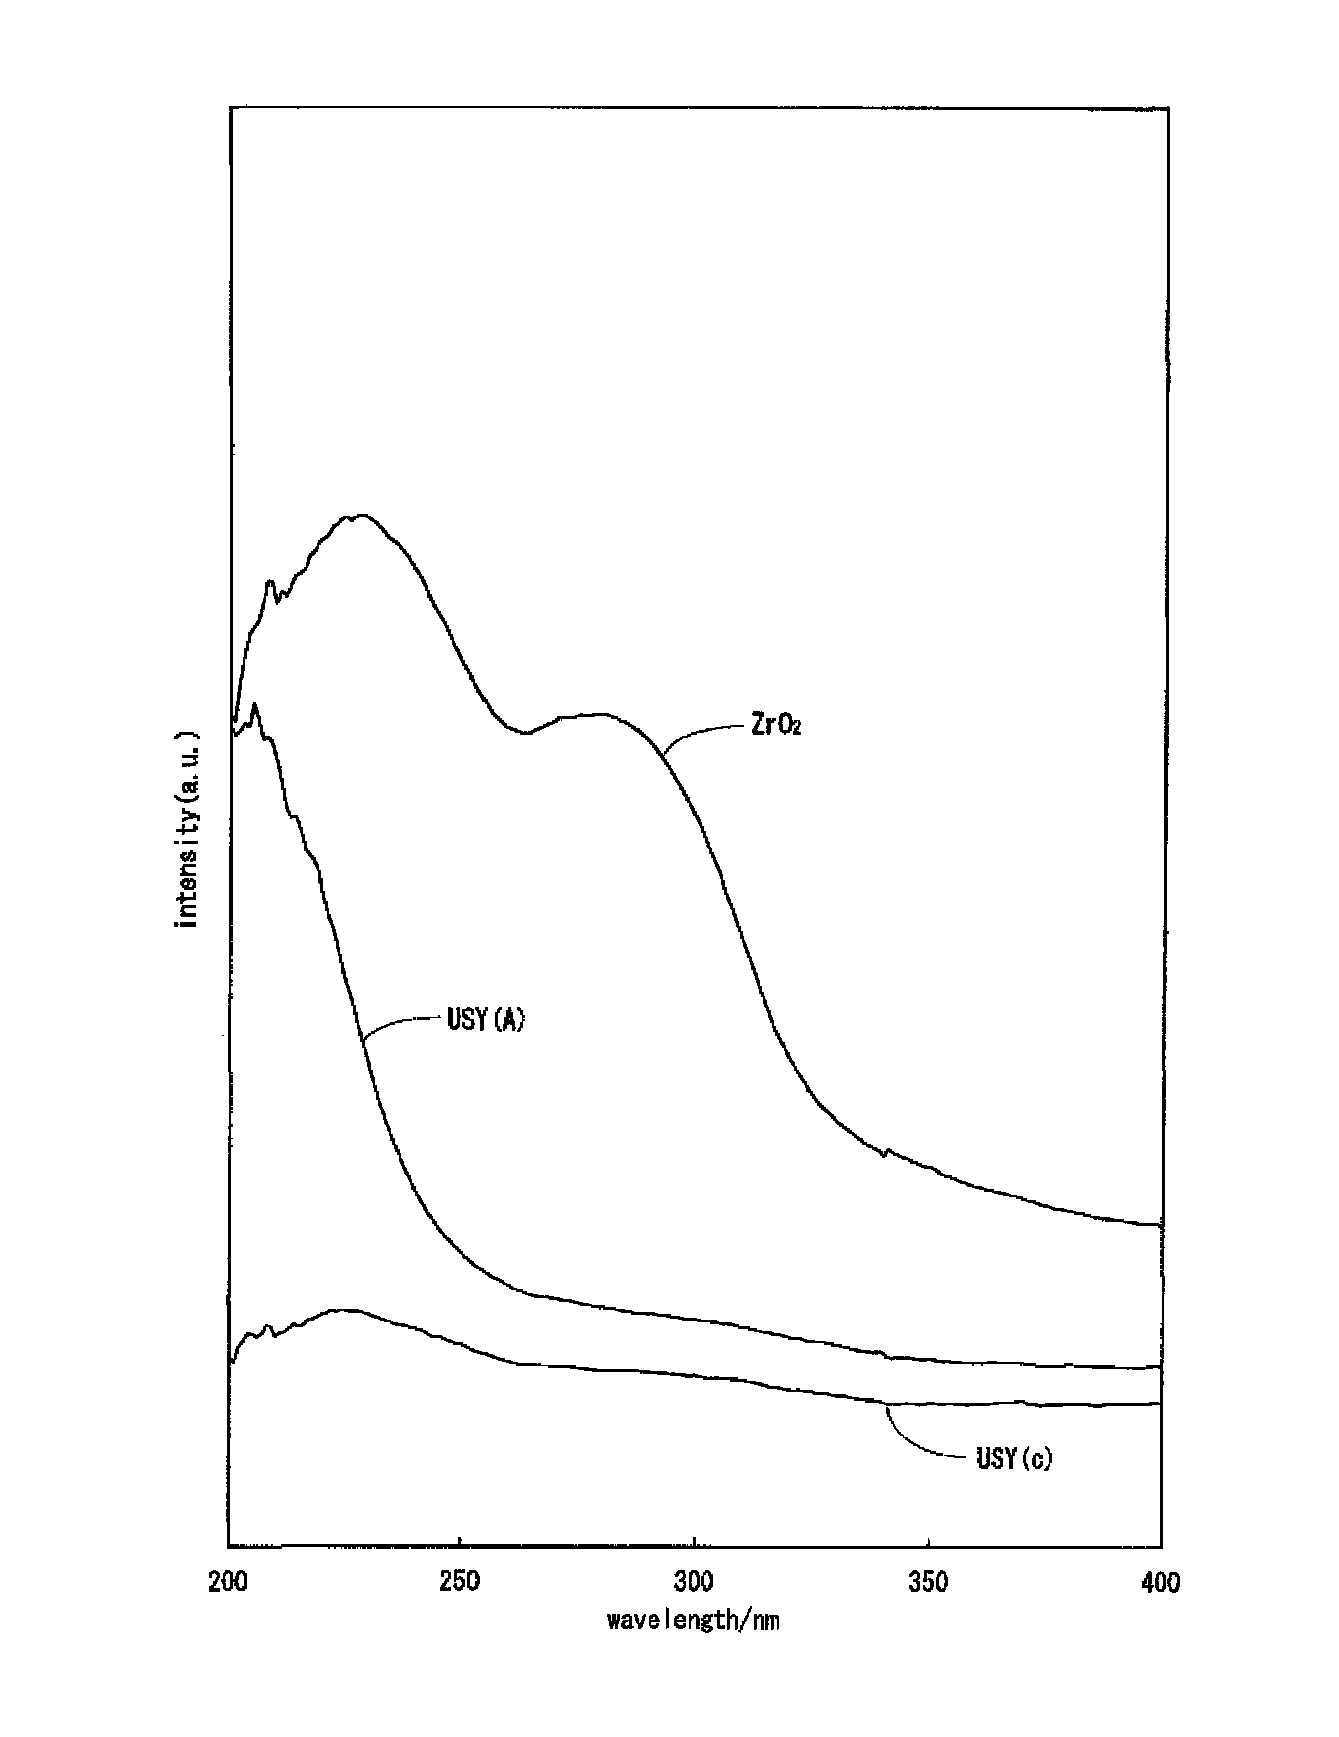 Hydrocracking catalyst for hydrocarbon oil, method for producing hydrocracking catalyst, and method for hydrocracking hydrocarbon oil with hydrocracking catalyst